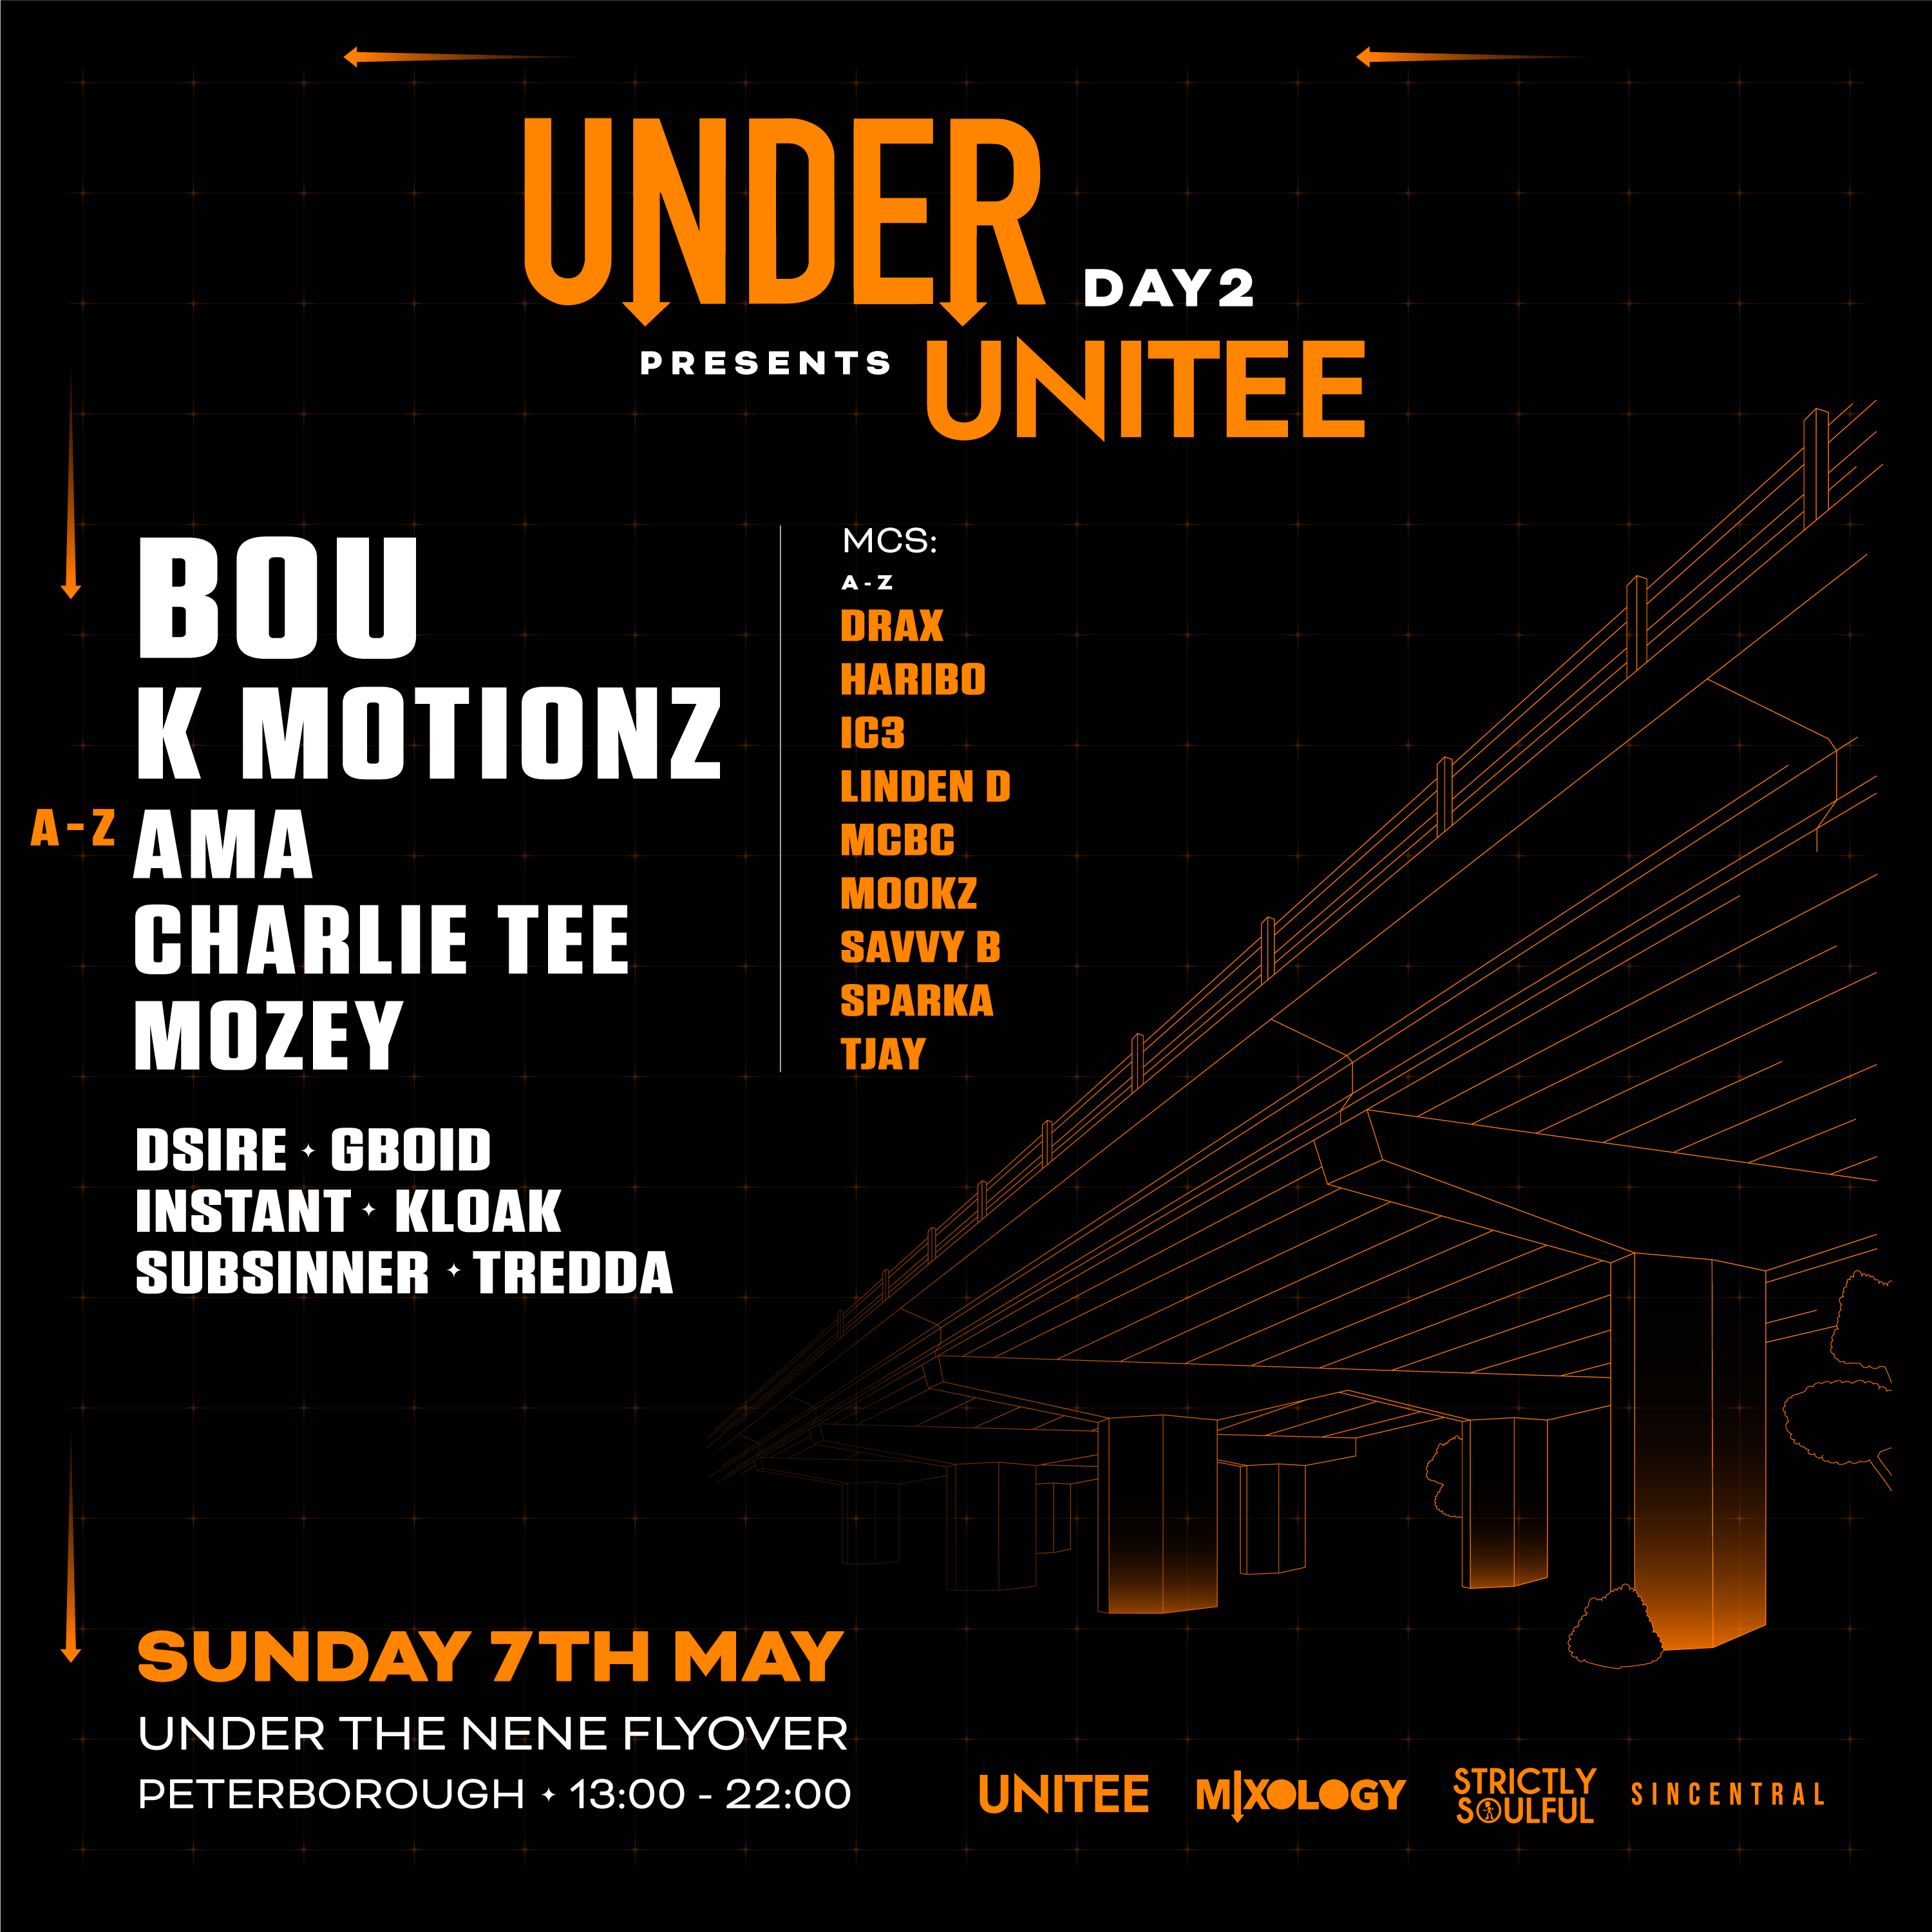 Under presents Unitee - Bou, K Motionz, Charlie Tee, Mozey, AMA, Strictly Soulful, Sin Central - フライヤー表